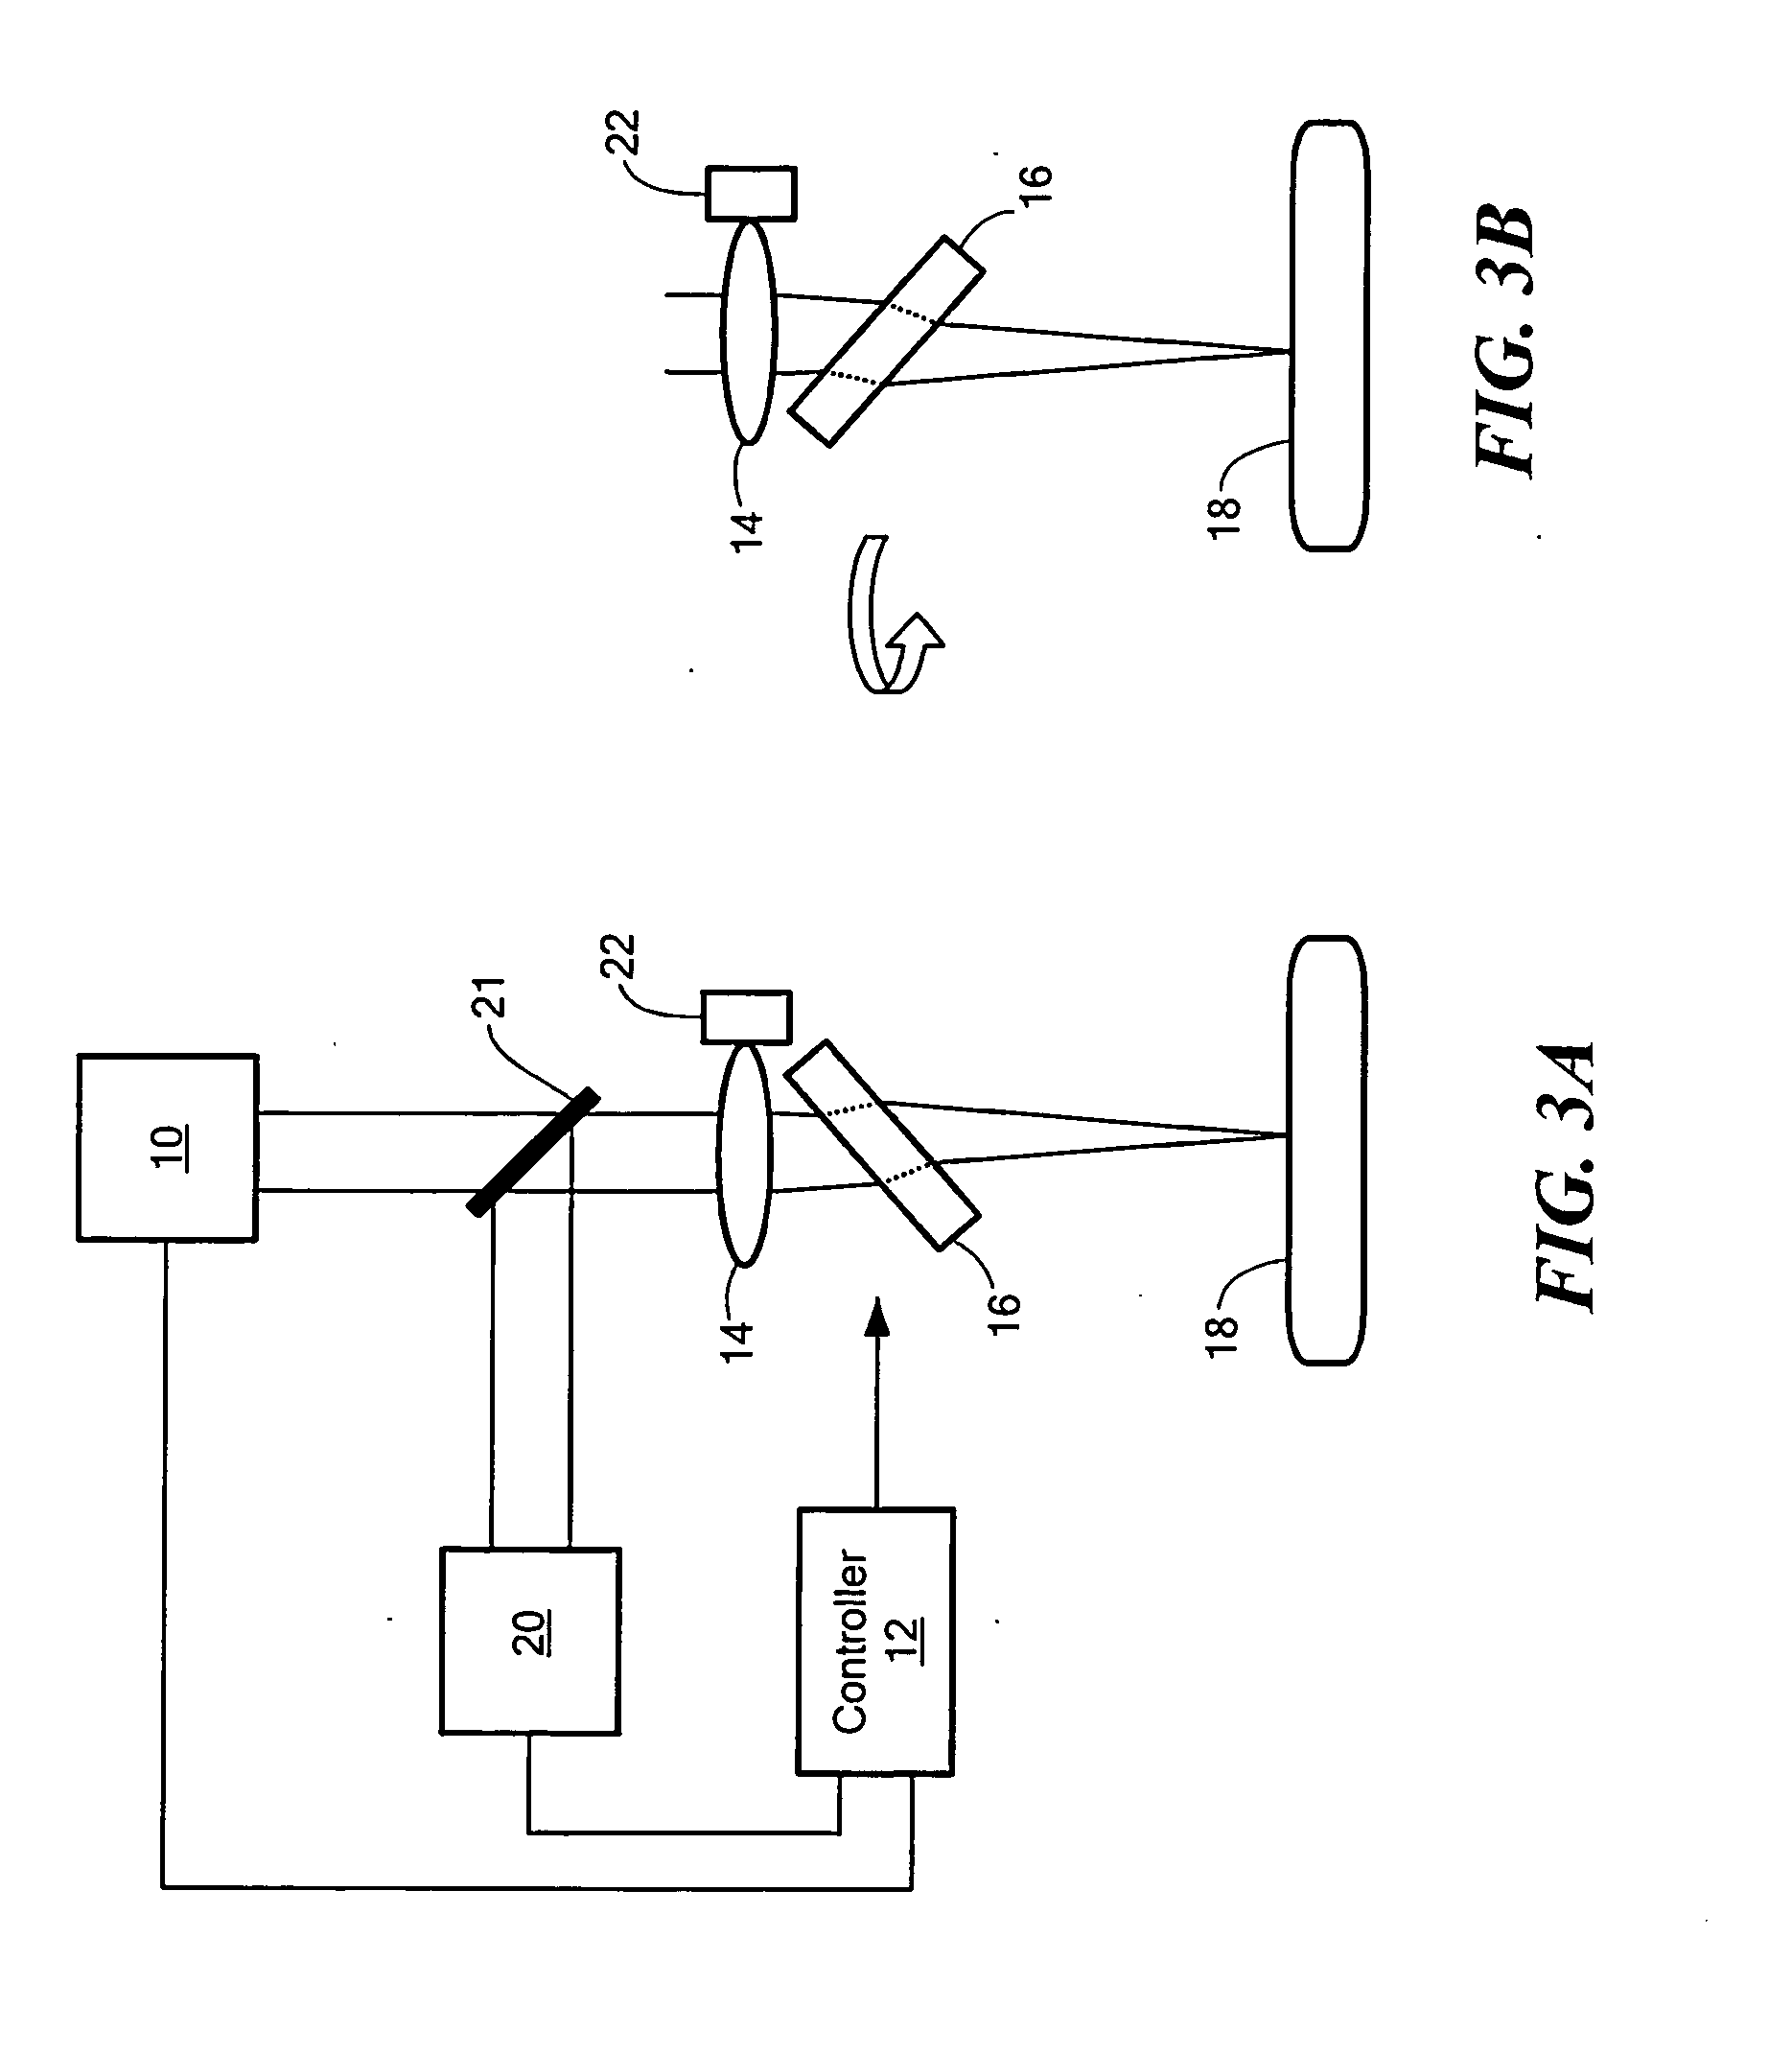 Automated Focusing, Cleaning, and Multiple Location Sampling Spectrometer System